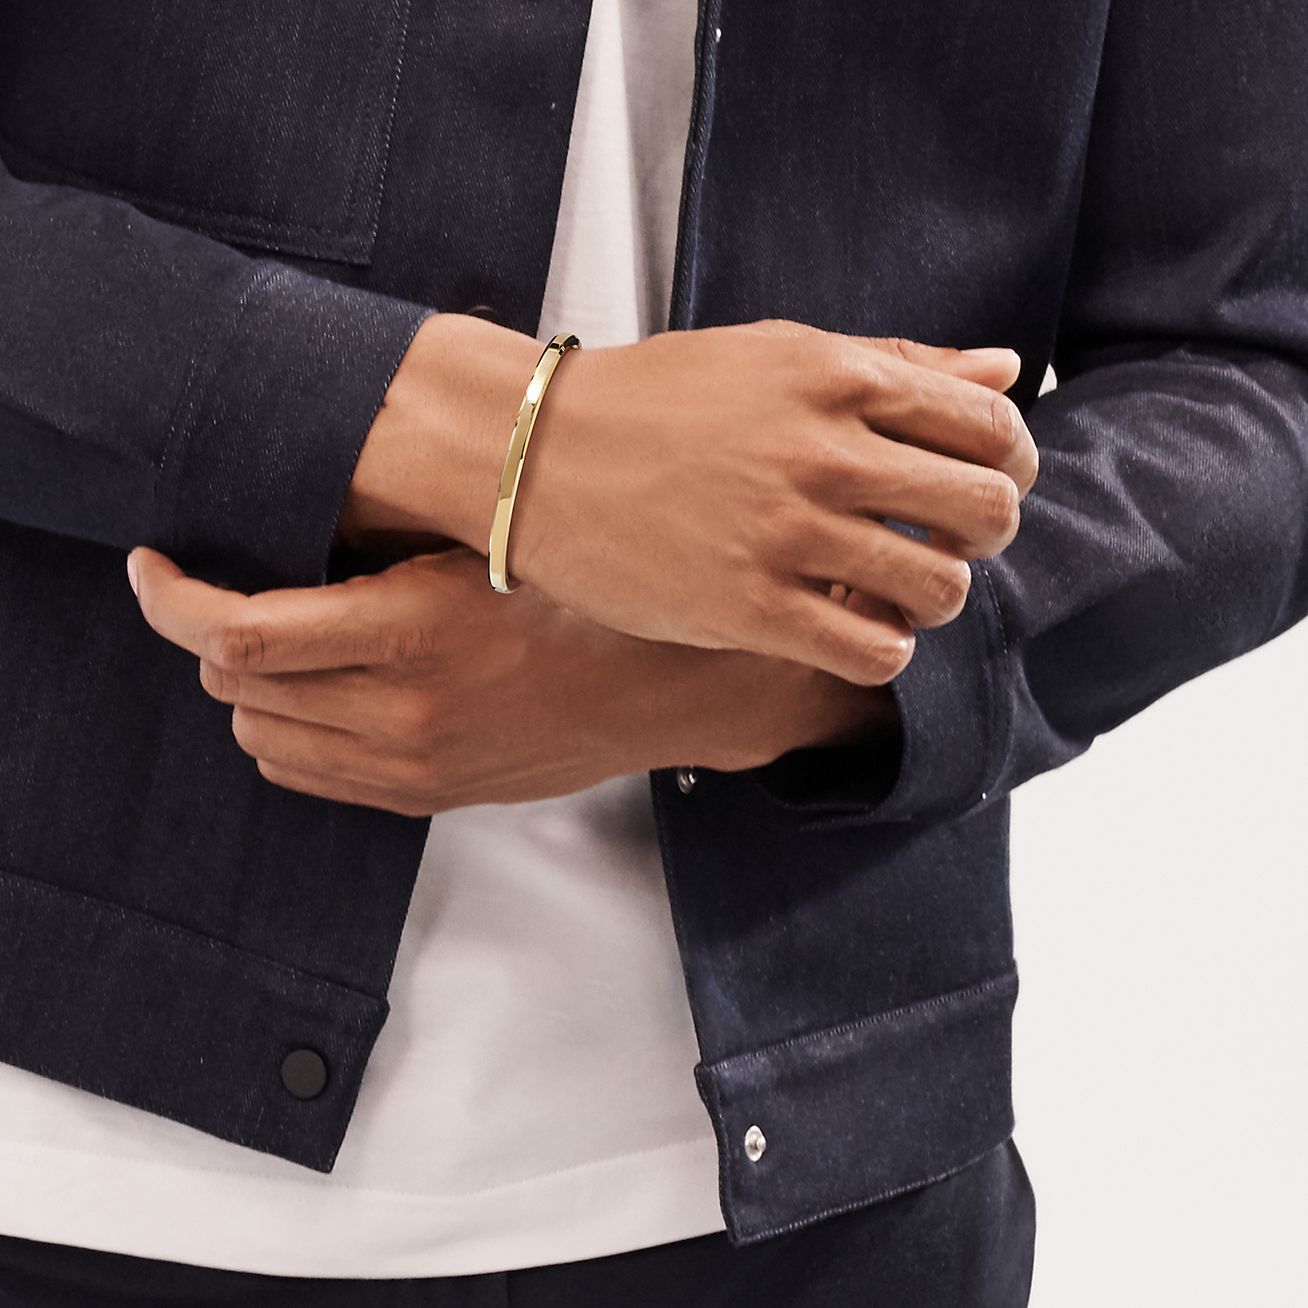 A model wearing a denim jacket and on his wrist is Makers Narrow Cuff in 18k Gold